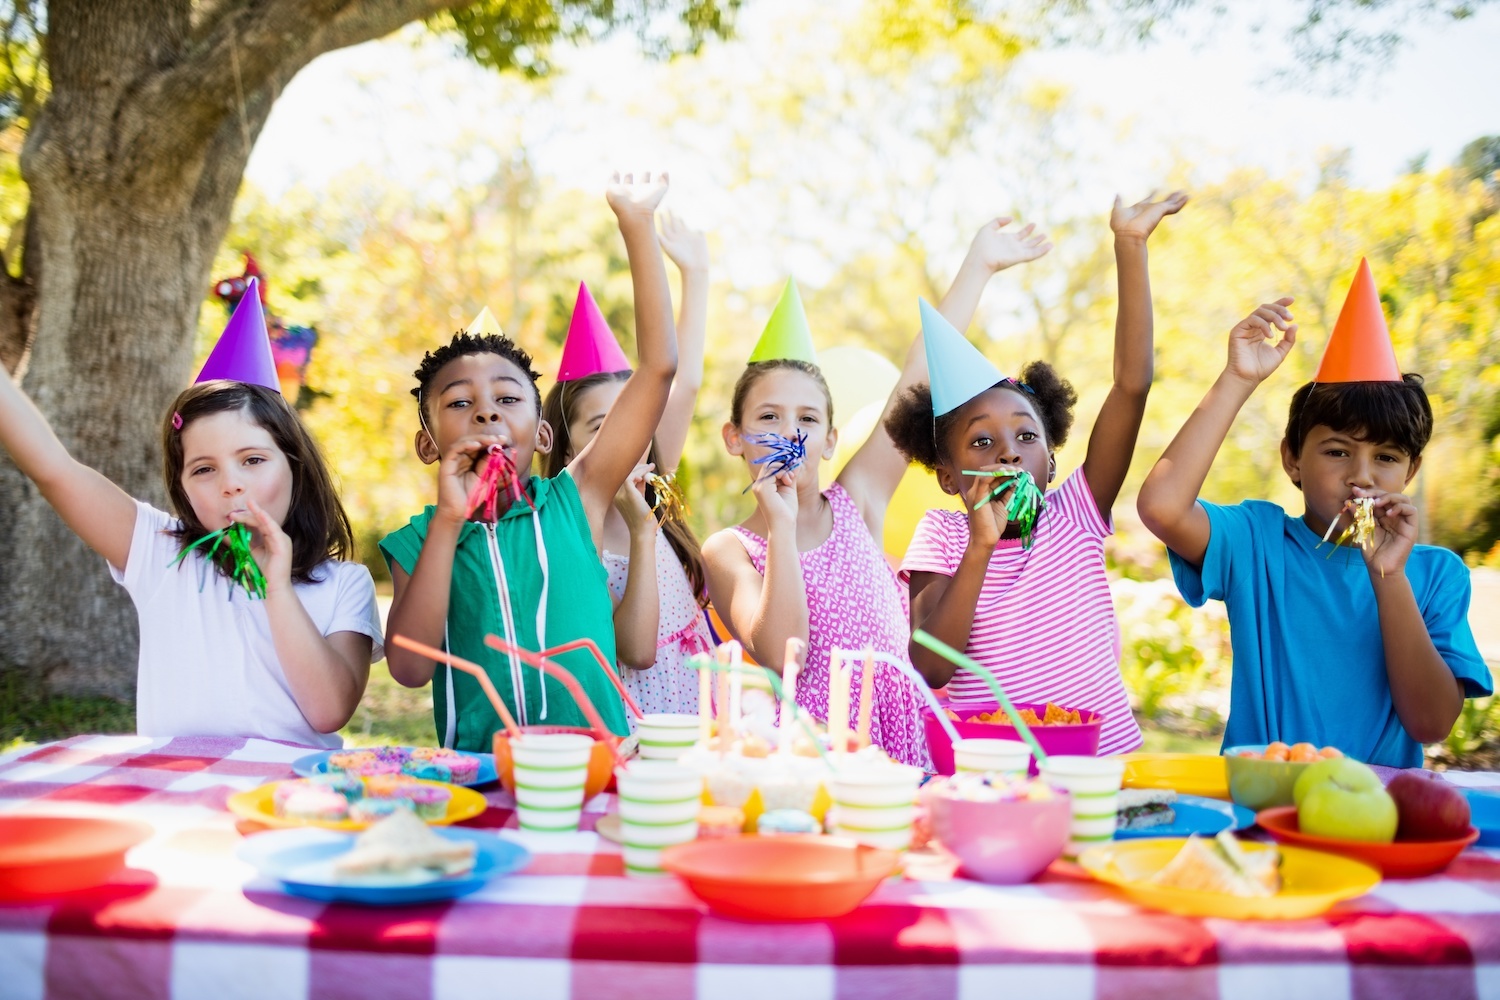 How to Make Your Birthday Party Special in Dubai